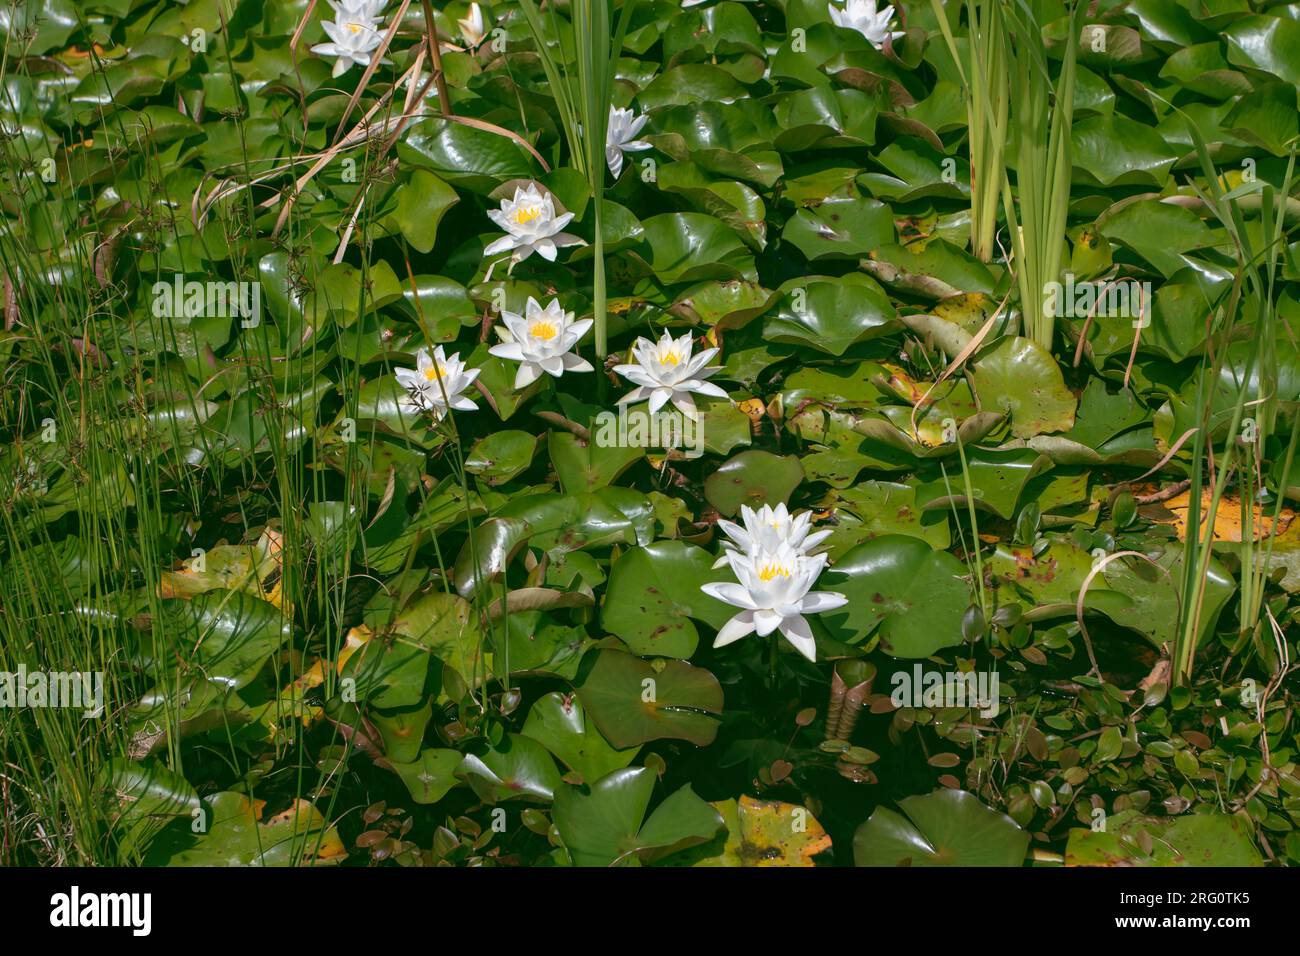 Decorative pond with nymphaea odorata aquatic plants. Fragrant white water lily flowers and leaves on the water surface. Stock Photo